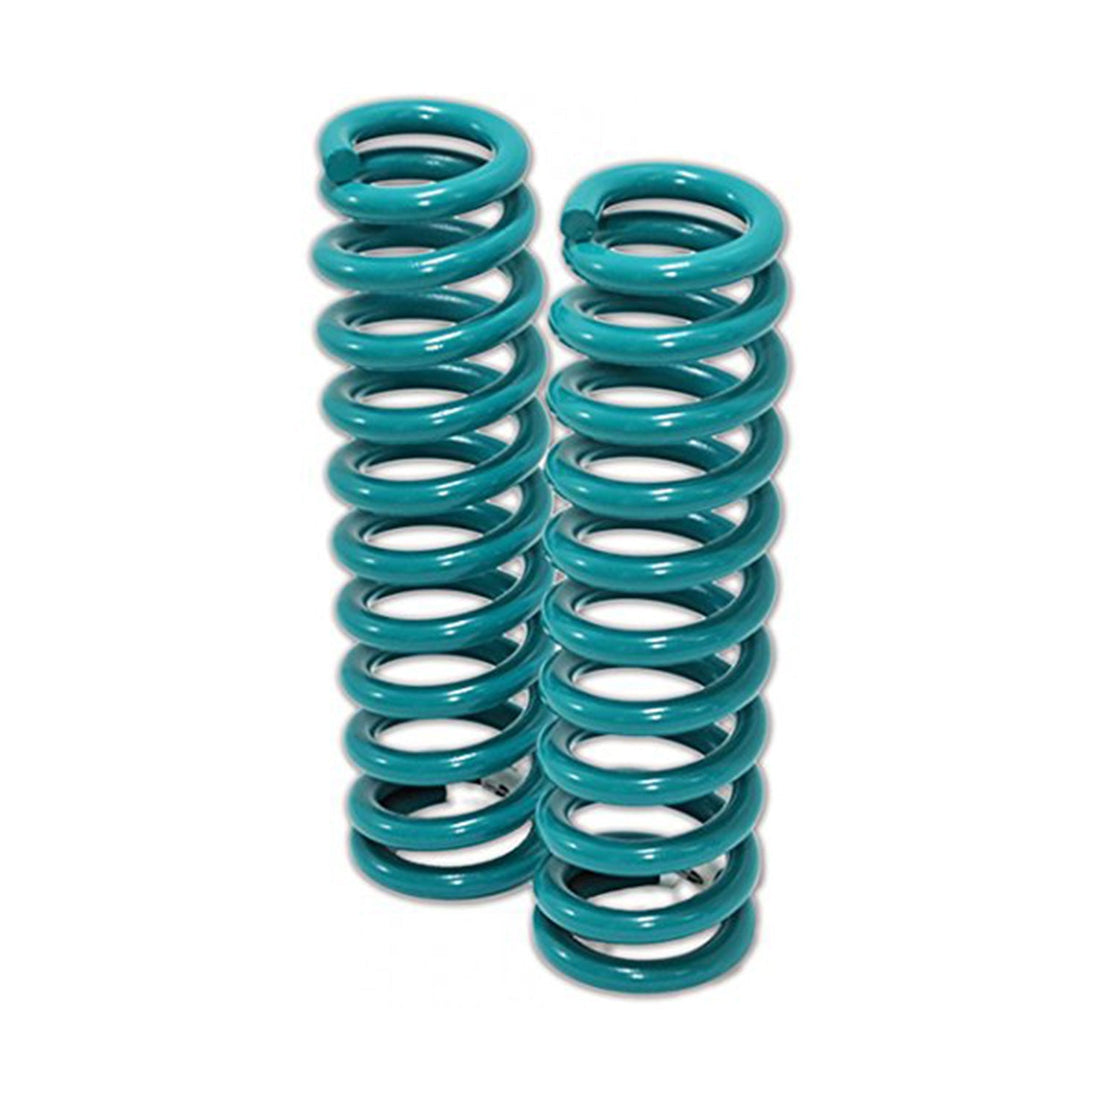 Dobinsons Front Lifted Coil Springs for Toyota 4x4 SUV's multiple (C59-252)